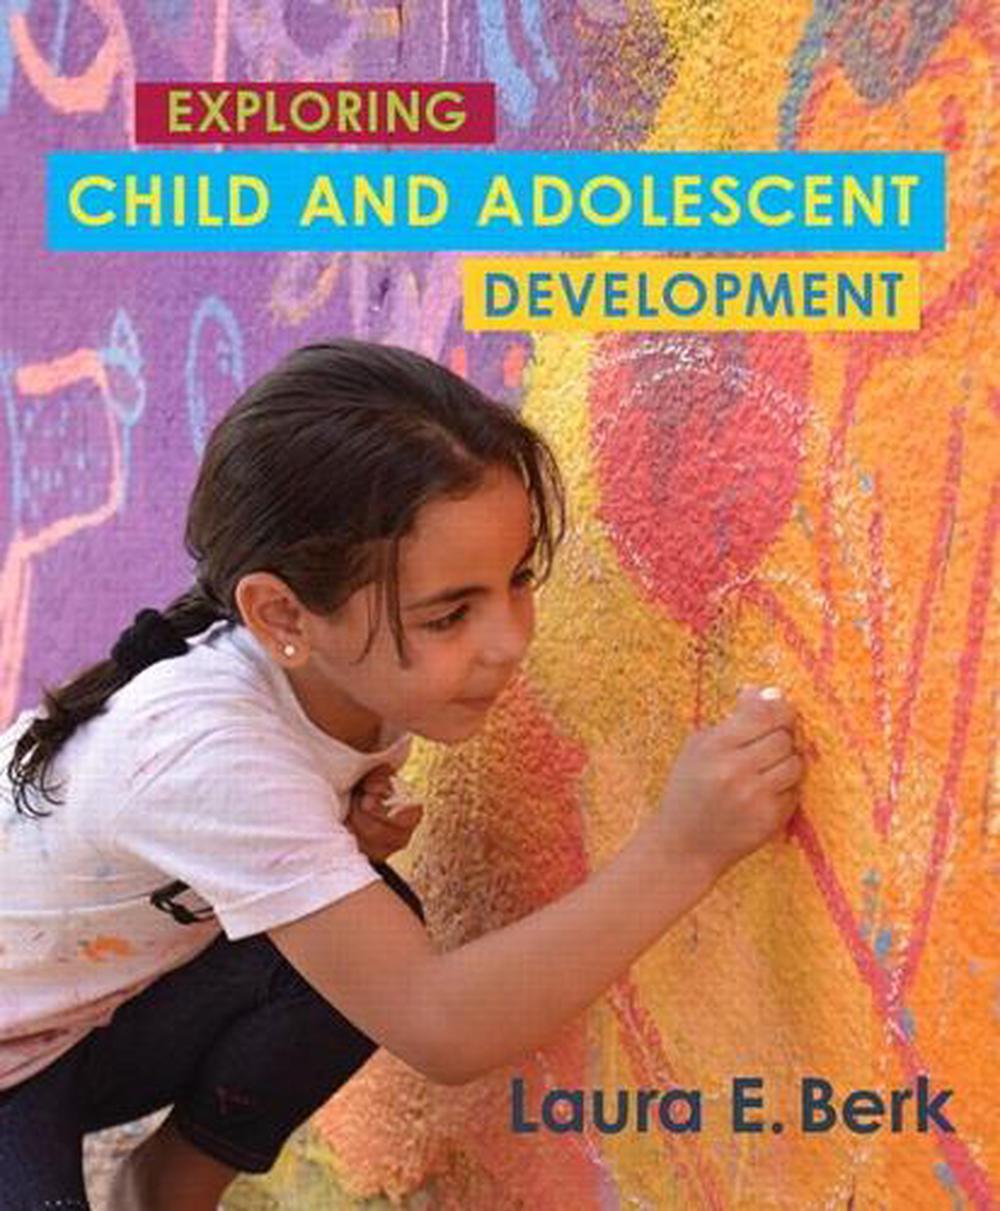 abstract research on child and adolescent development